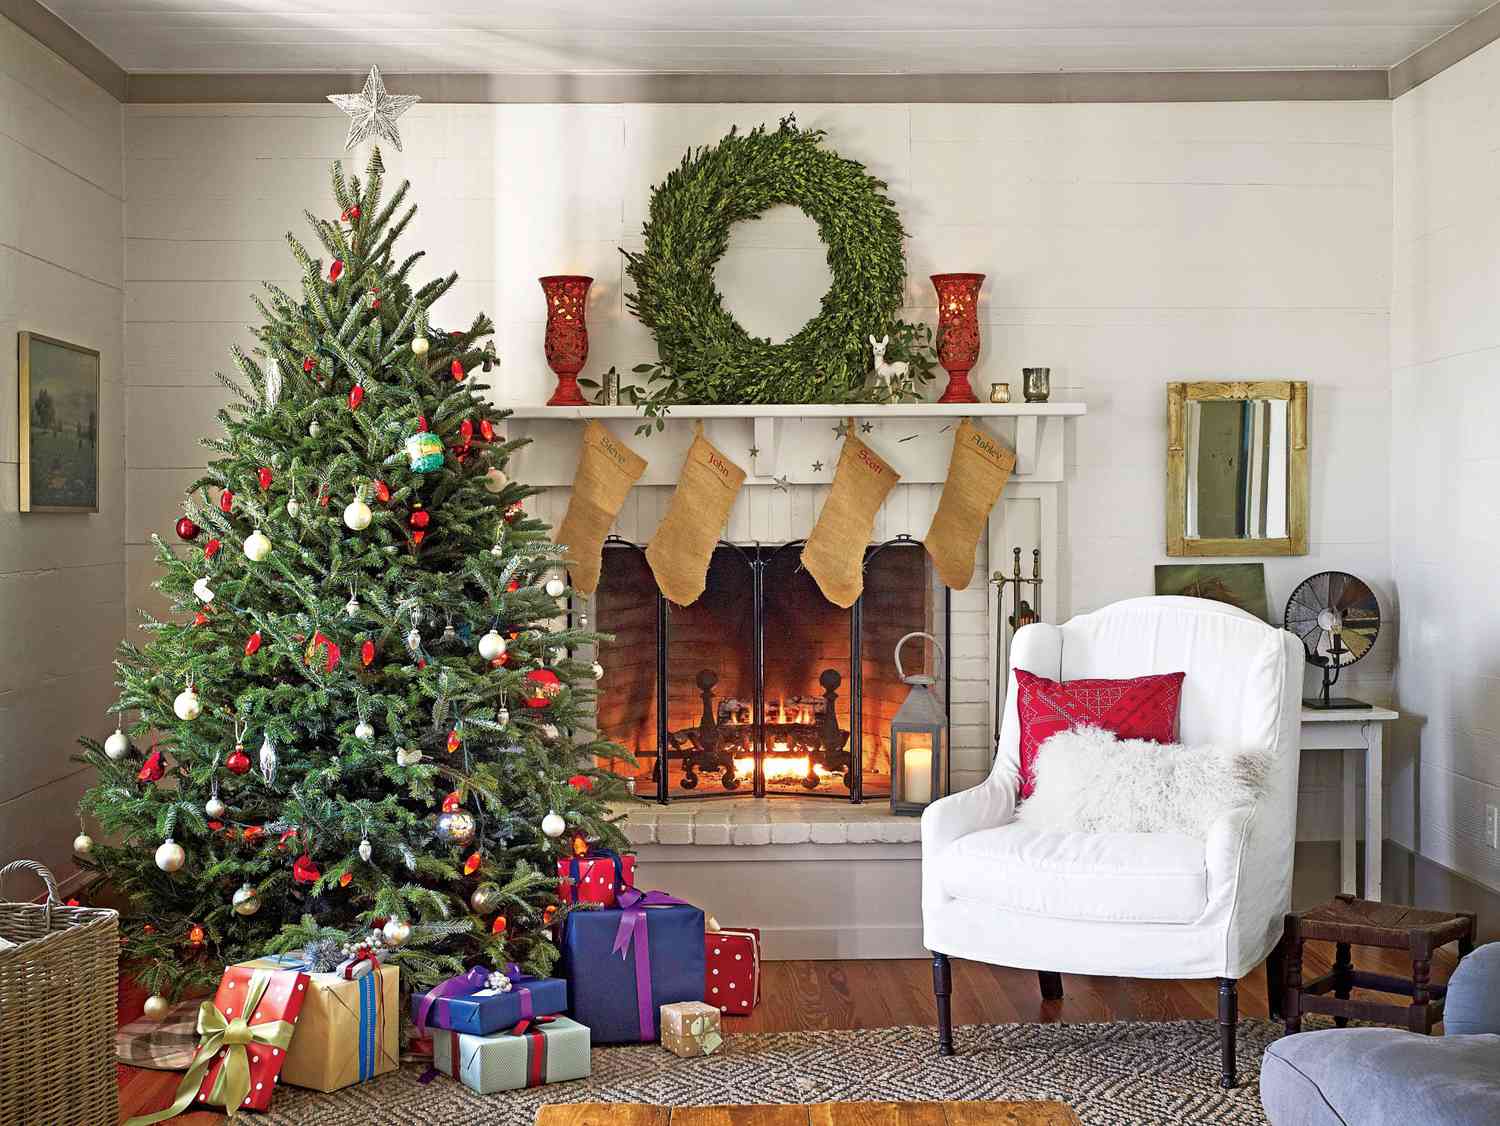 4 Ways to Make a Fabulous Christmas Tree This Year